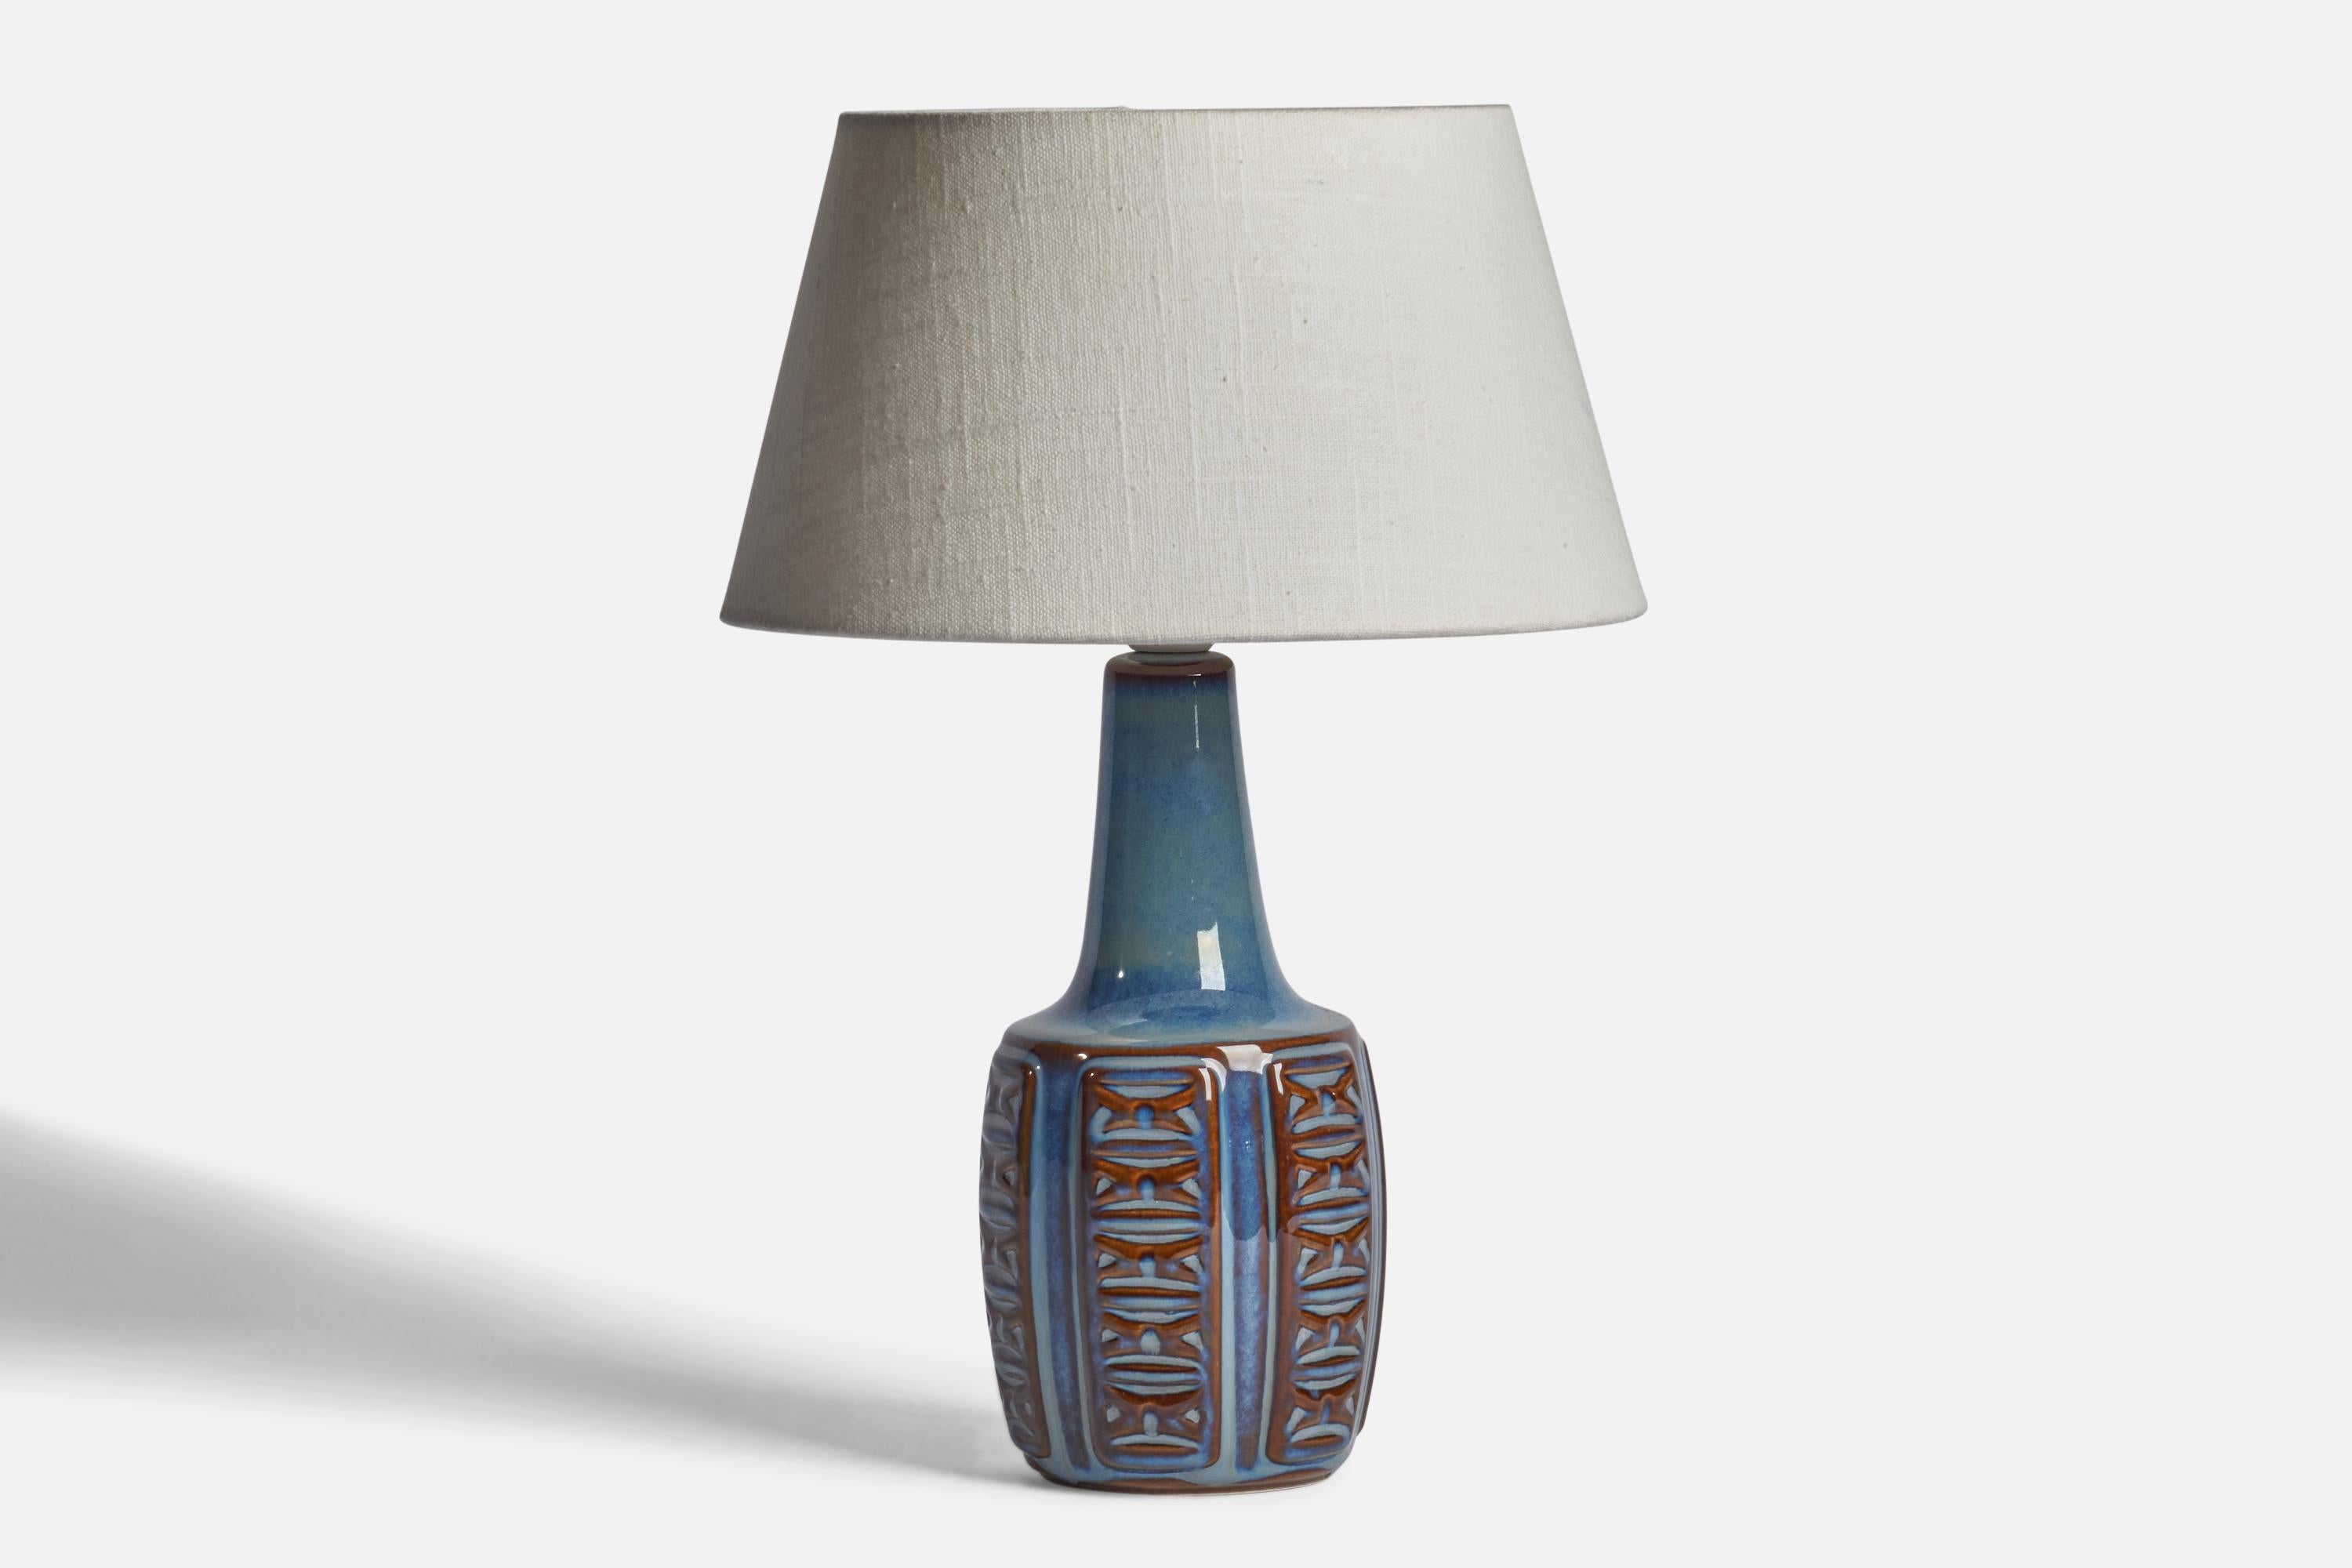 A blue and red-glazed stoneware table lamp designed and produced by Søholm, Denmark, 1960s.

Dimensions of Lamp (inches): 12